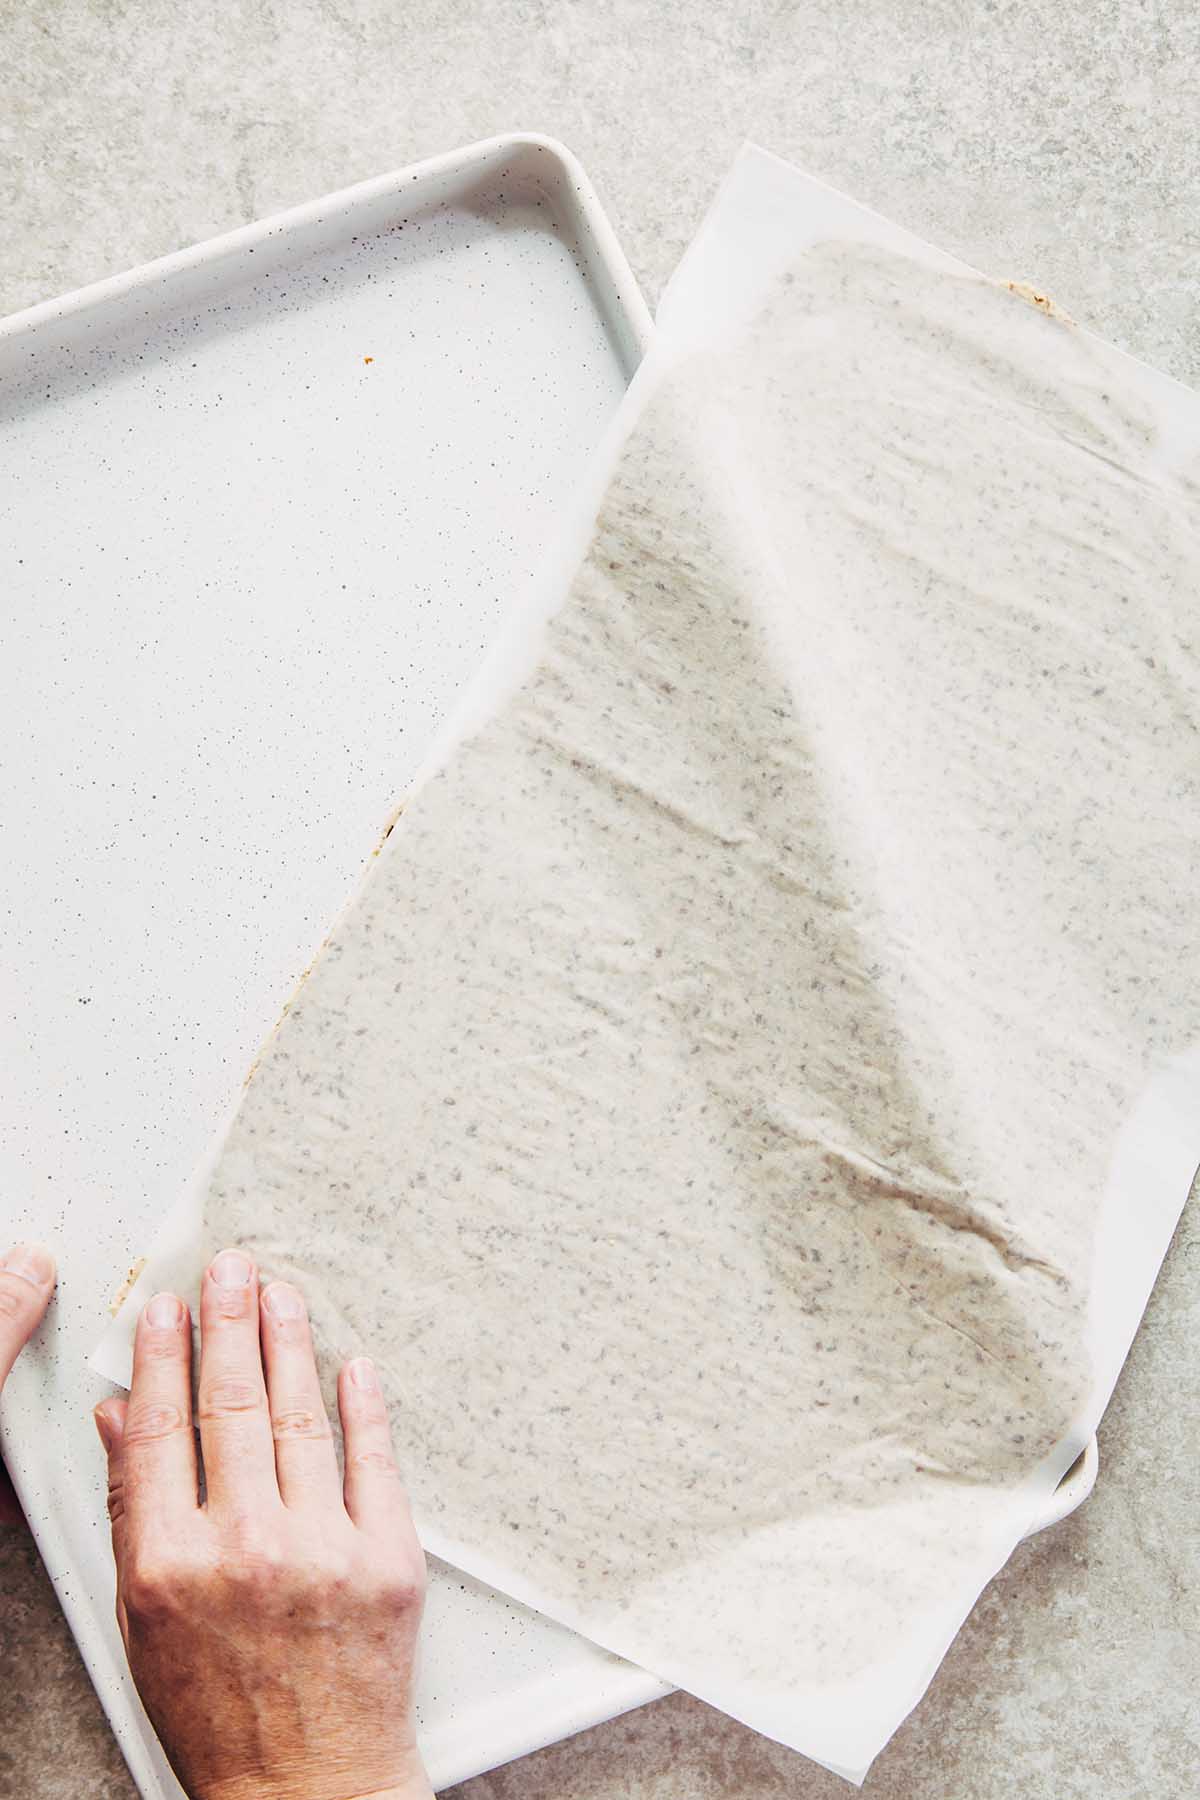 Hands transferring rolled dough between pieces of parchment paper onto a white baking sheet.